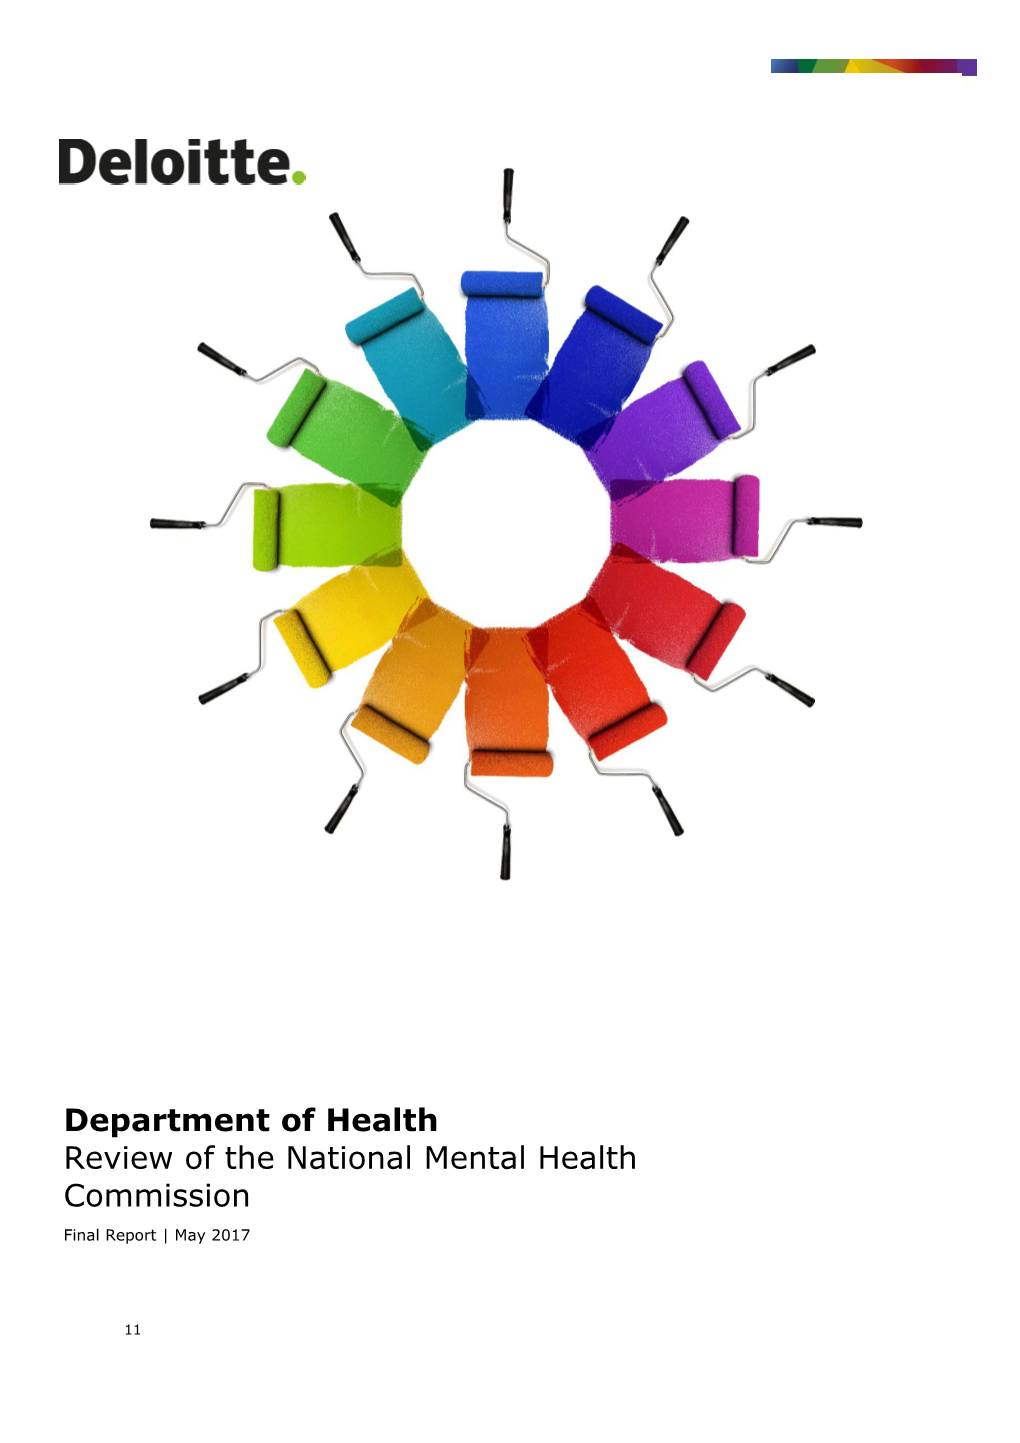 Review of the National Mental Health Commission